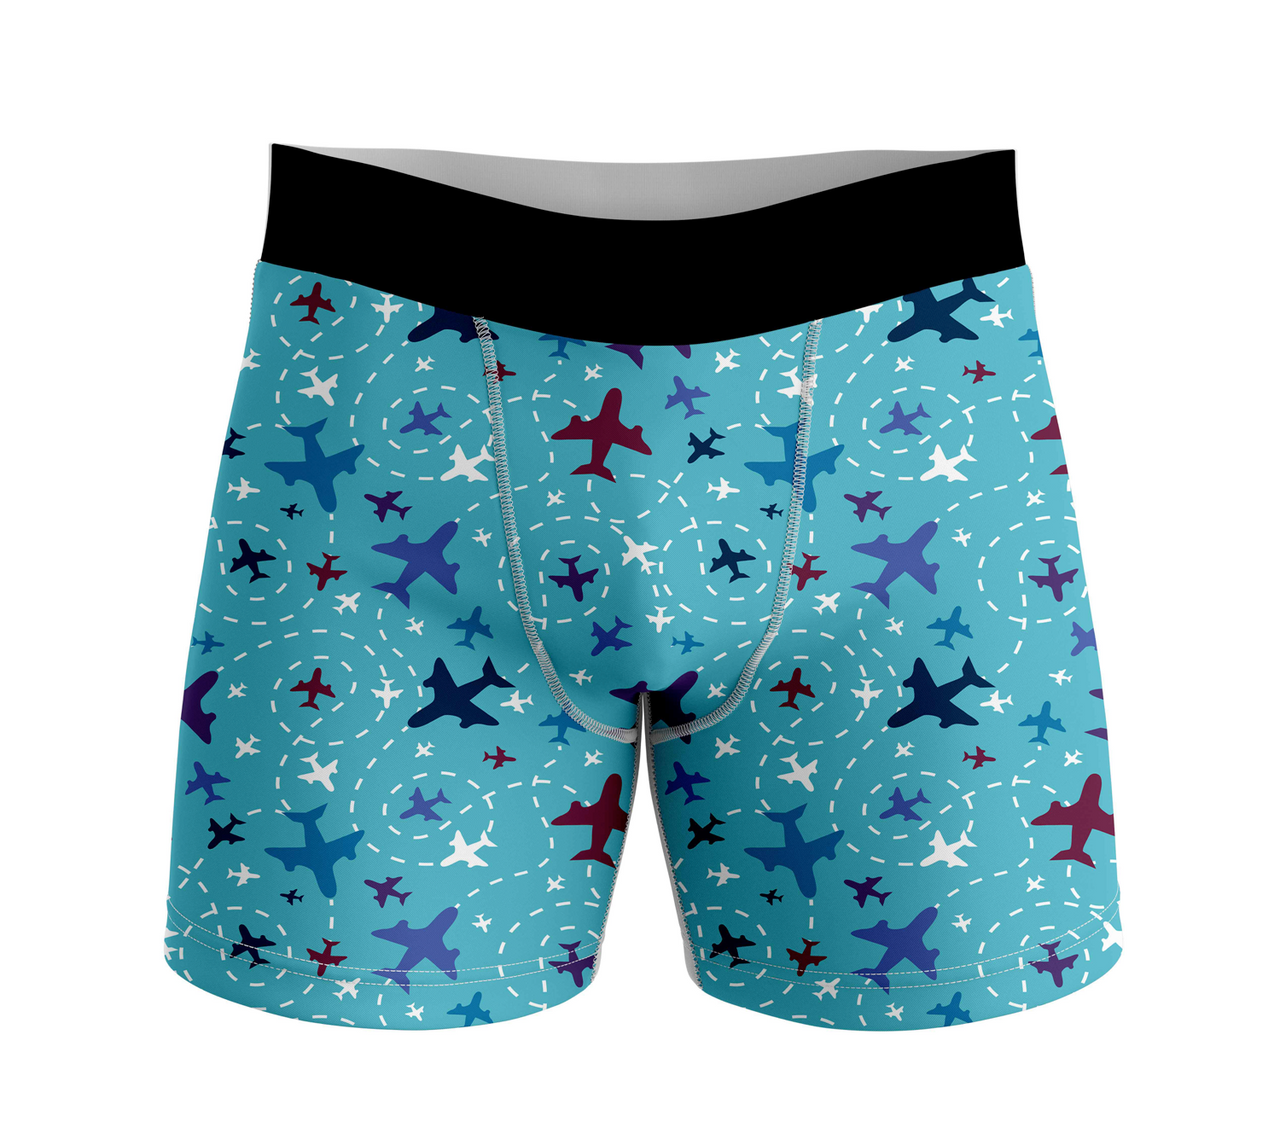 Love of Travel with Aircraft Designed Men Boxers